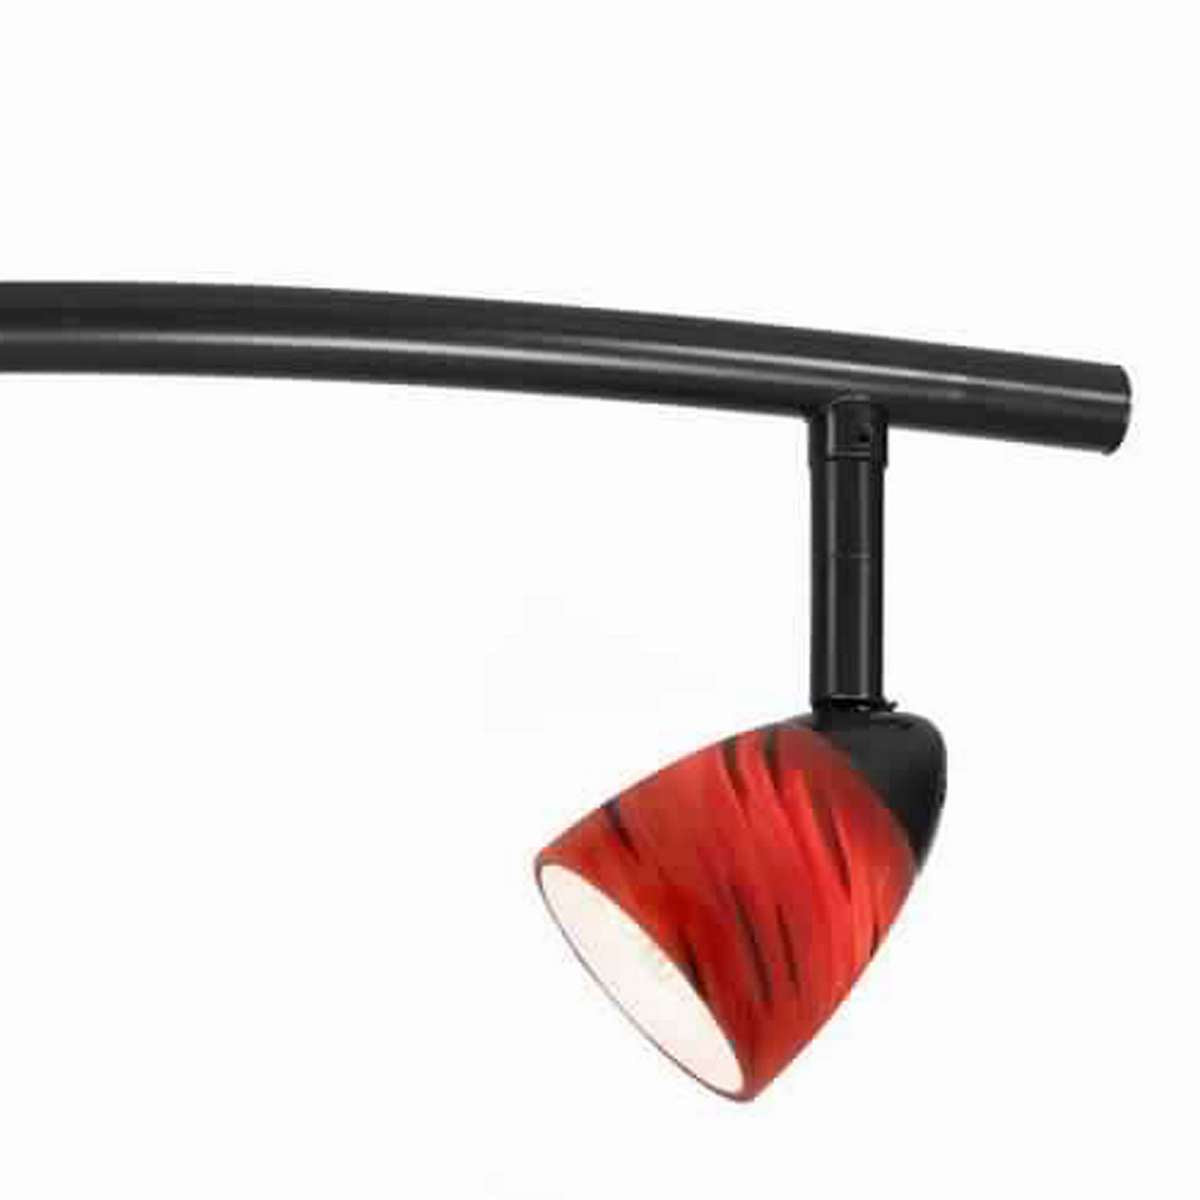 3 Light 120V Metal Track Light Fixture With Glass Shade, Black And Red By Benzara